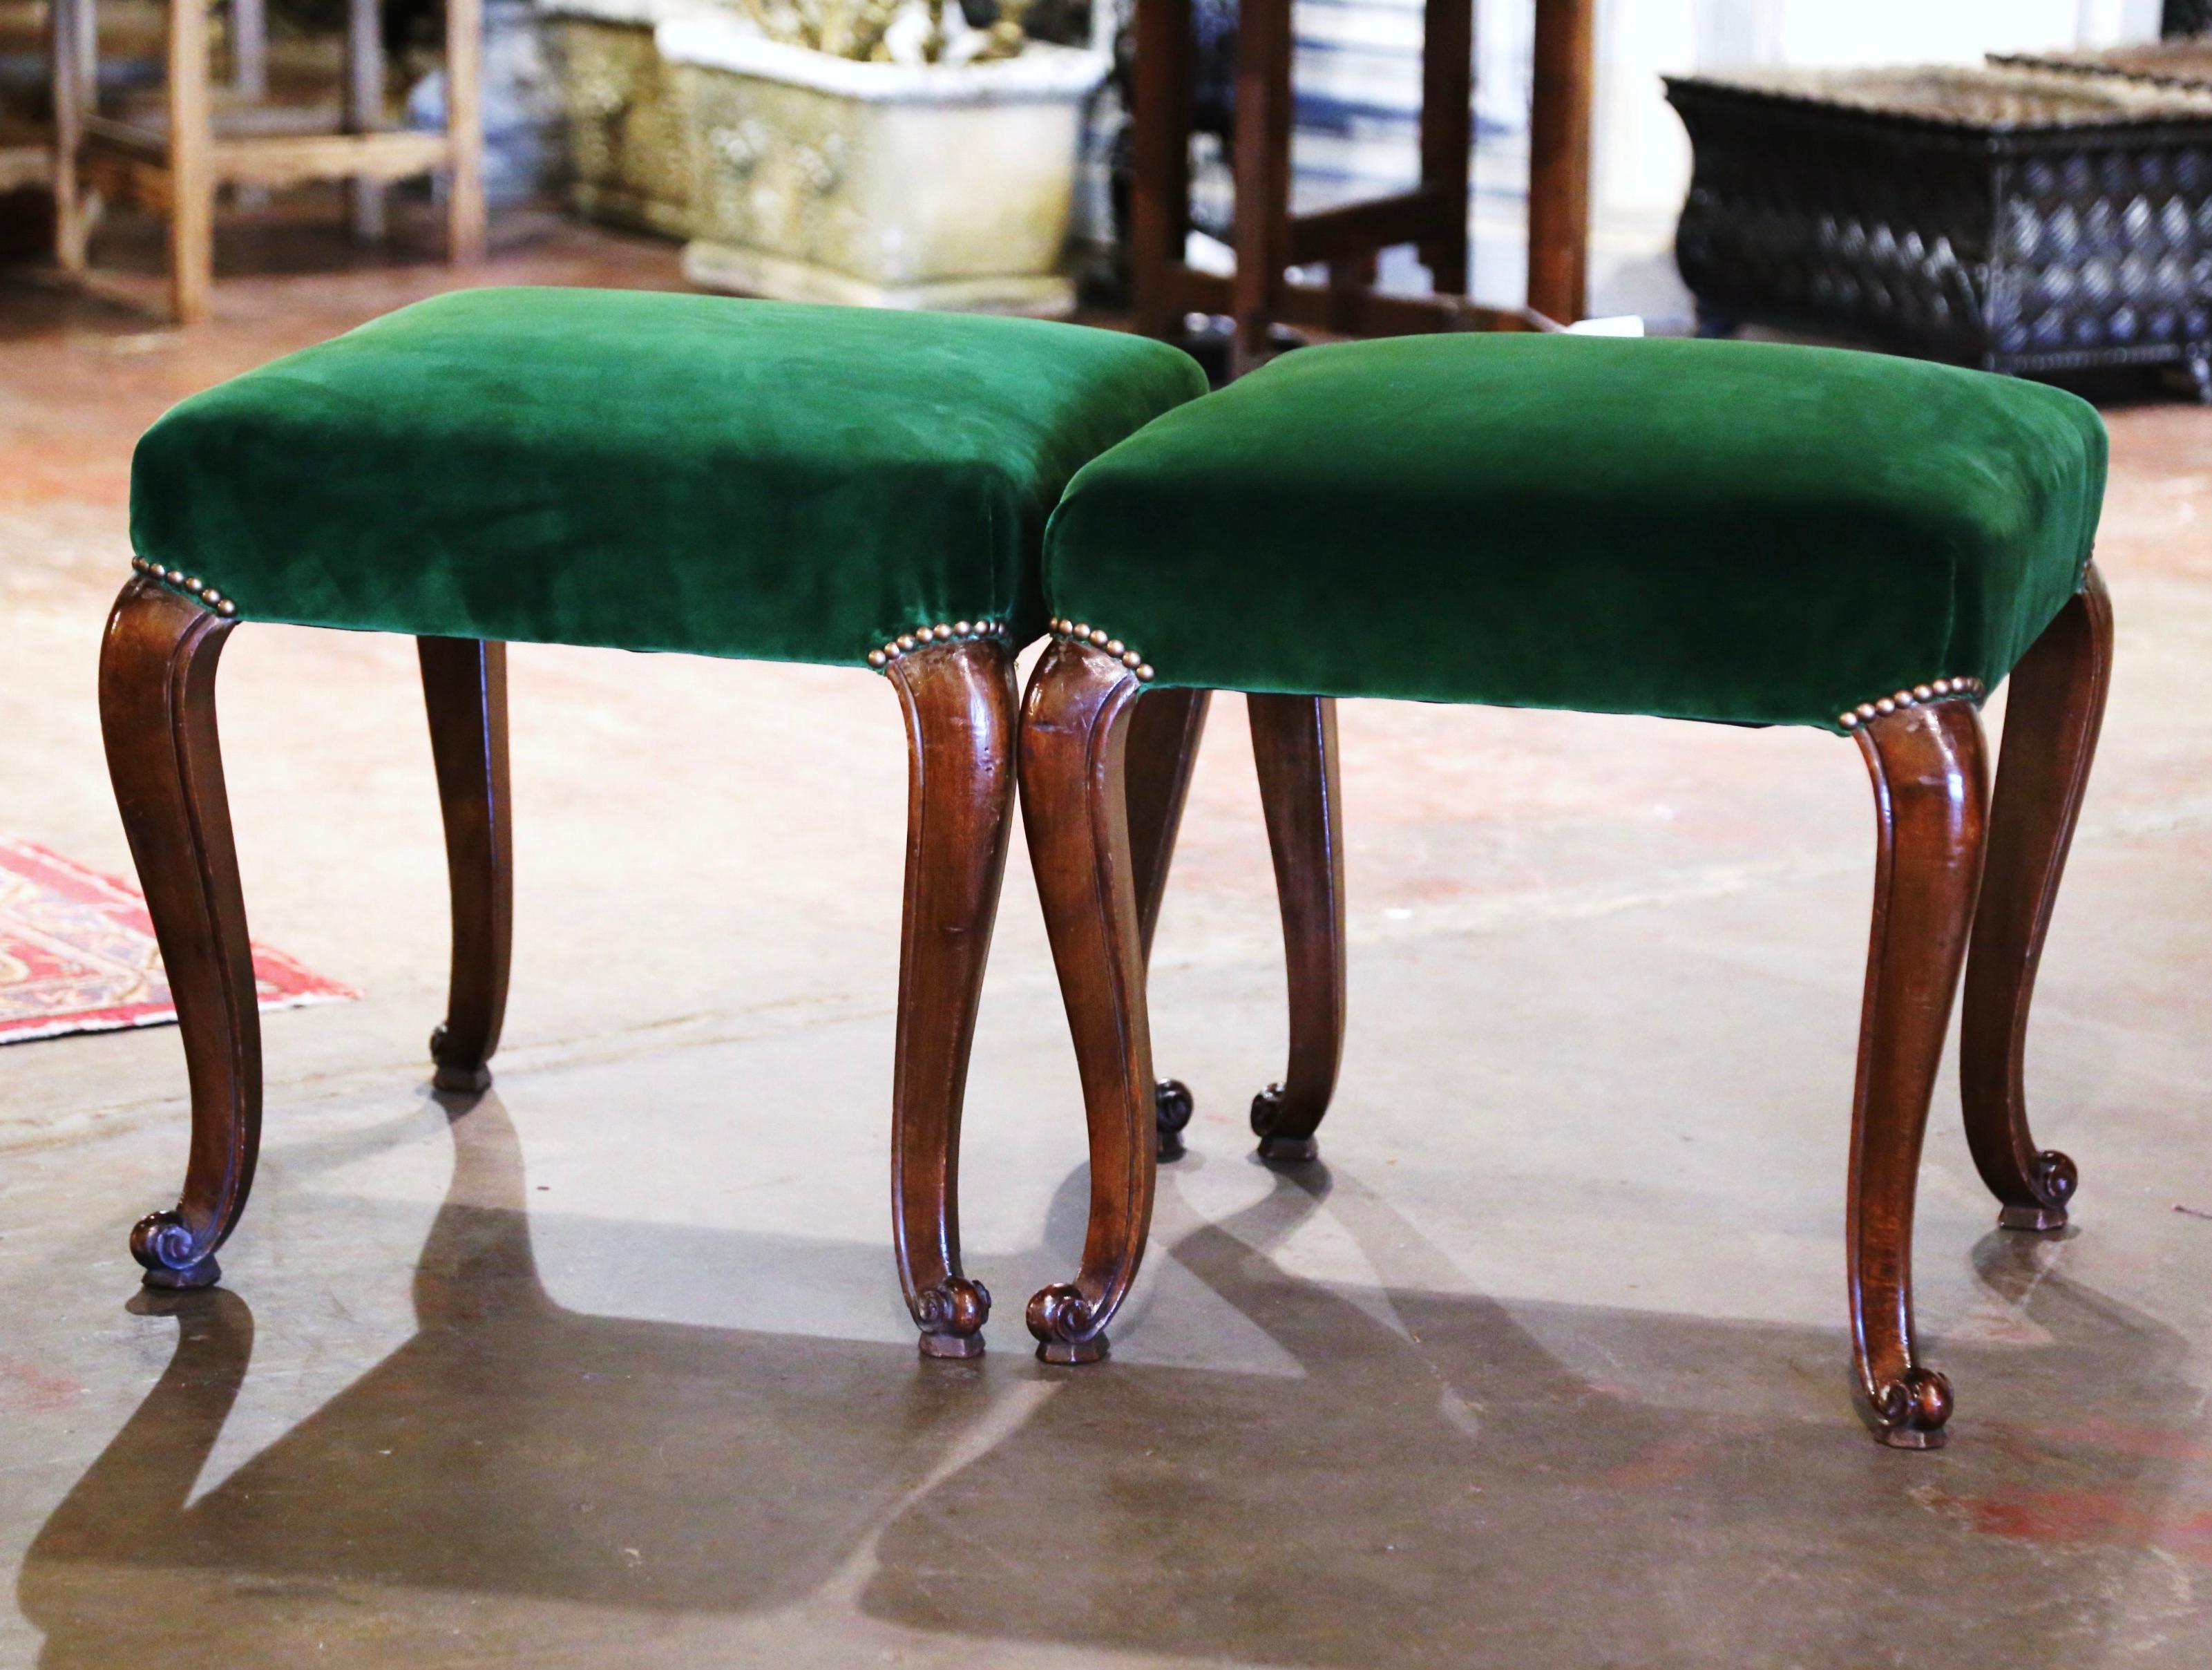 These elegant antique stools were crafted in southern France circa 1950. Standing on cabriole legs ending with escargot feet, each stool features a straight apron. The seat is newly upholstered with a wonderful dark green velvet fabric embellished